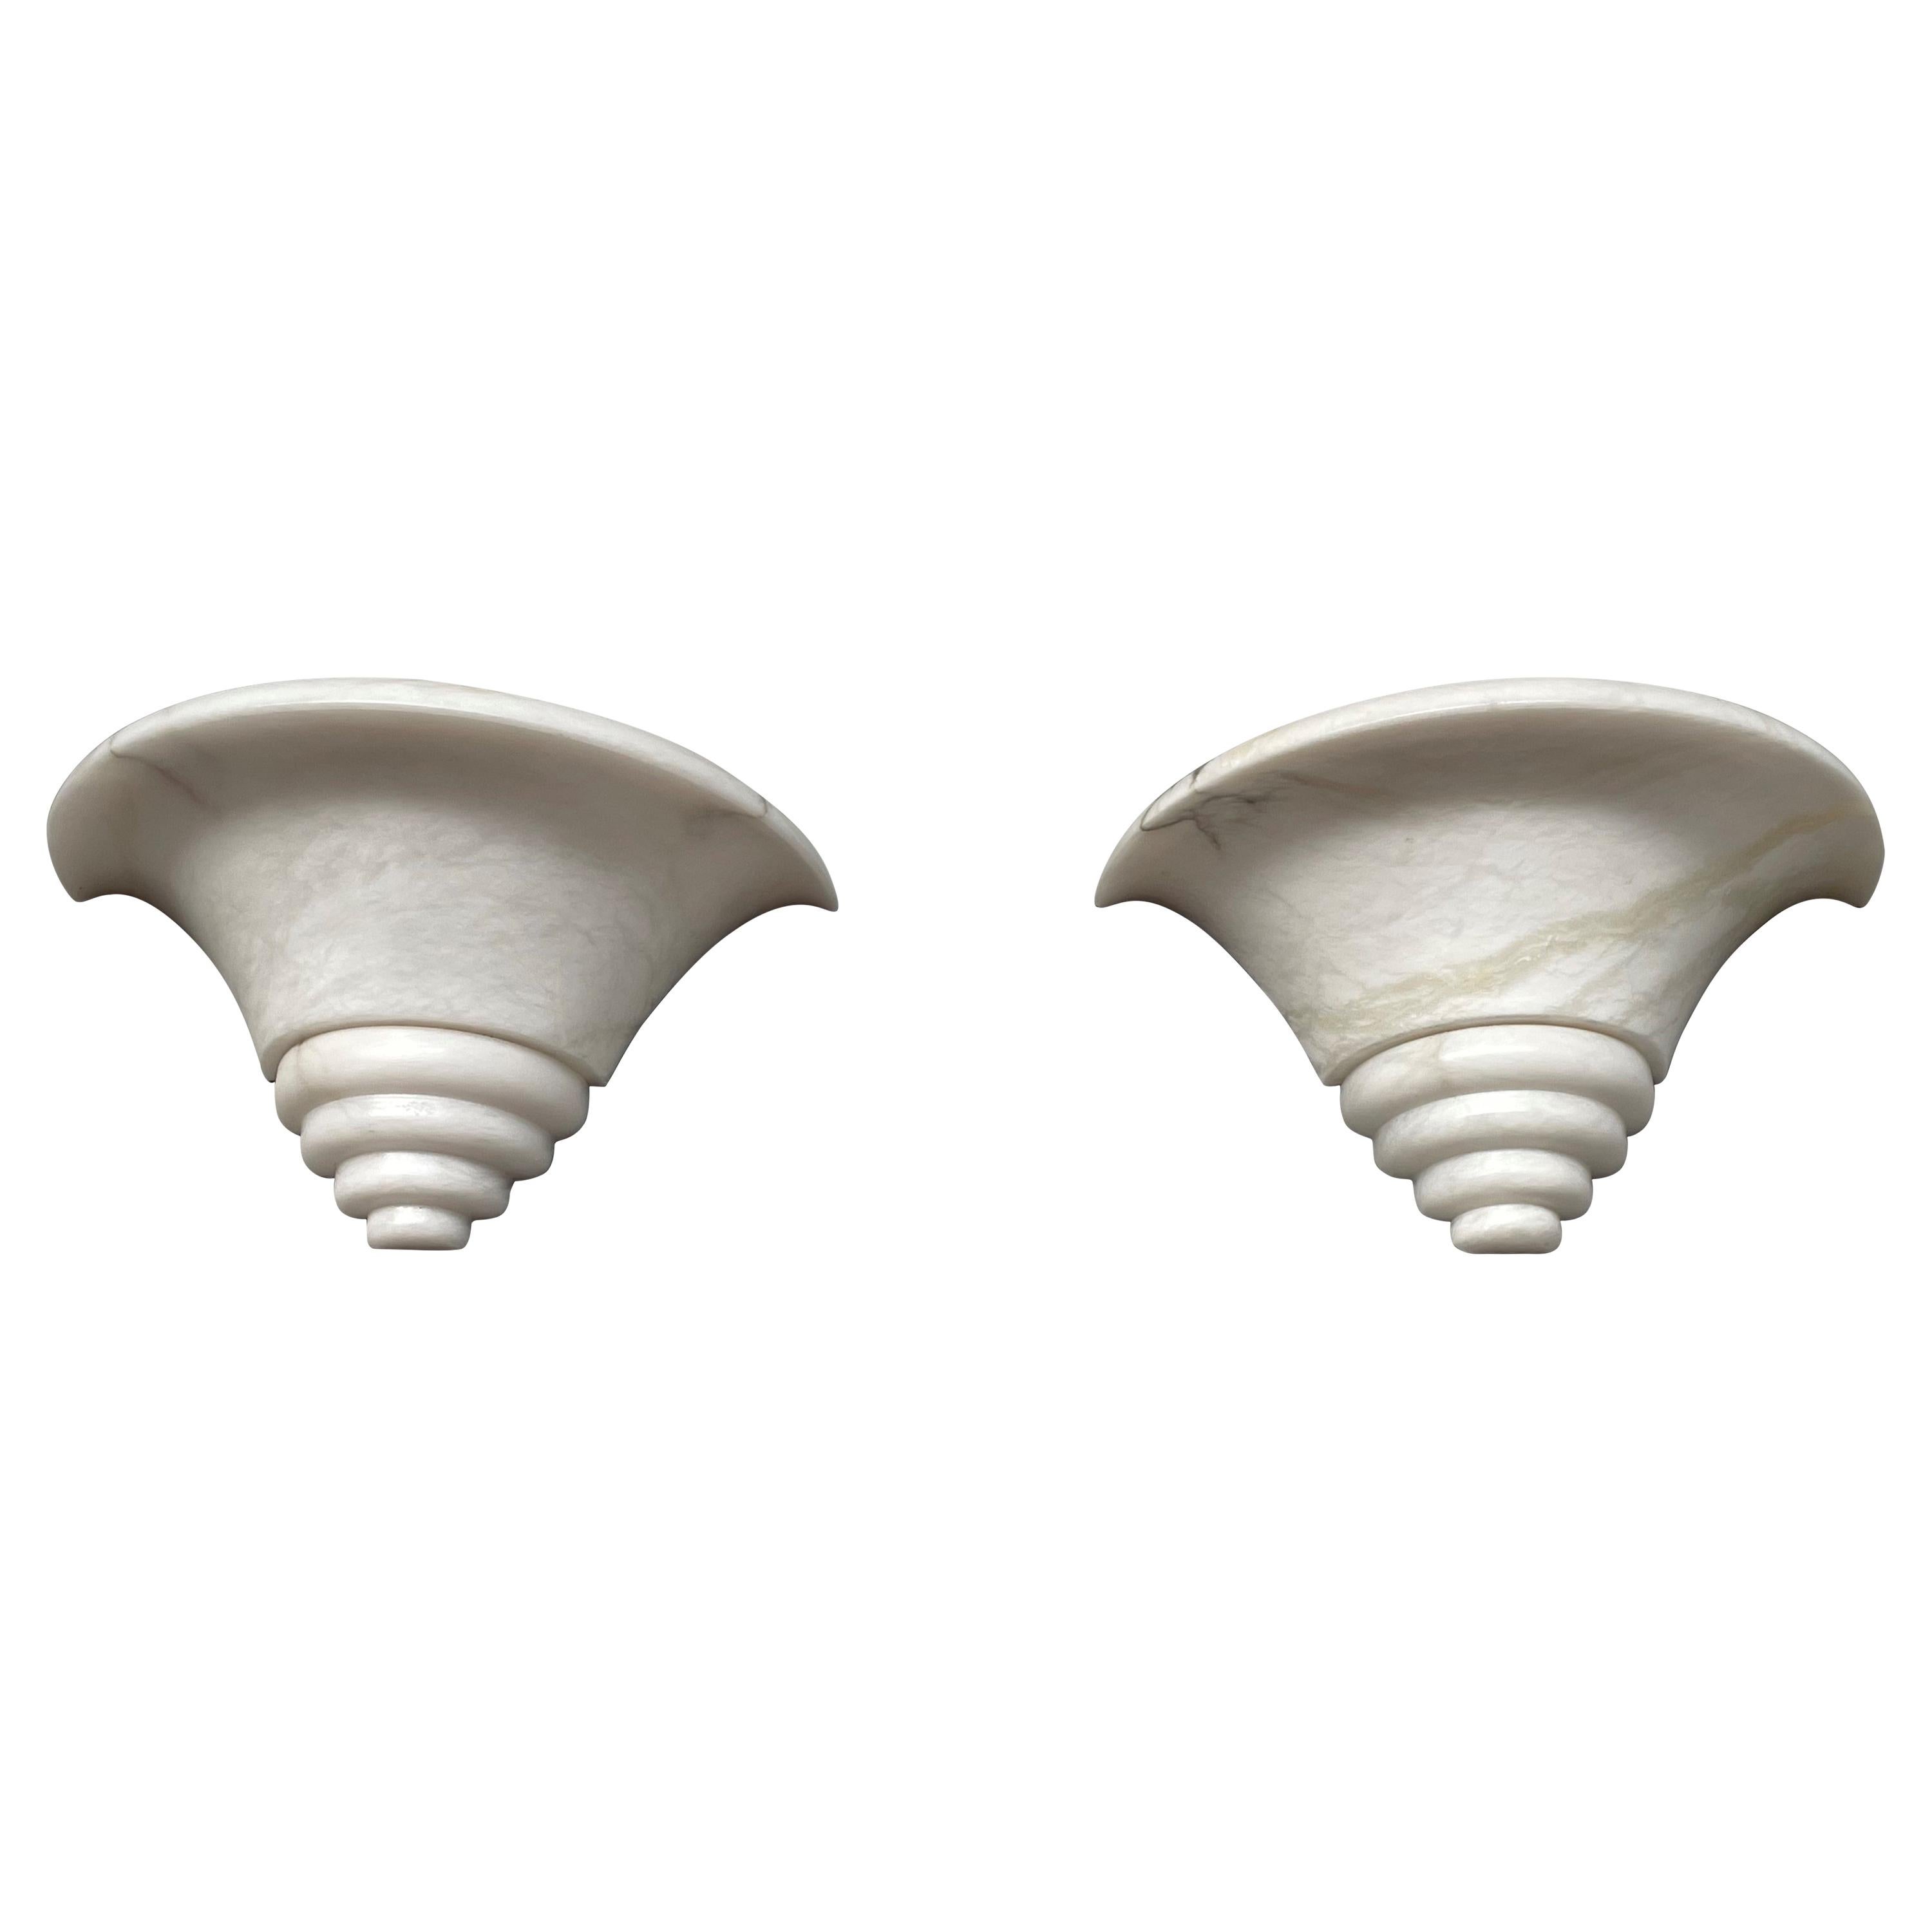 Exceptional Shape Midcentury Era Pair of Alabaster Wall Sconces Lamps / Lights